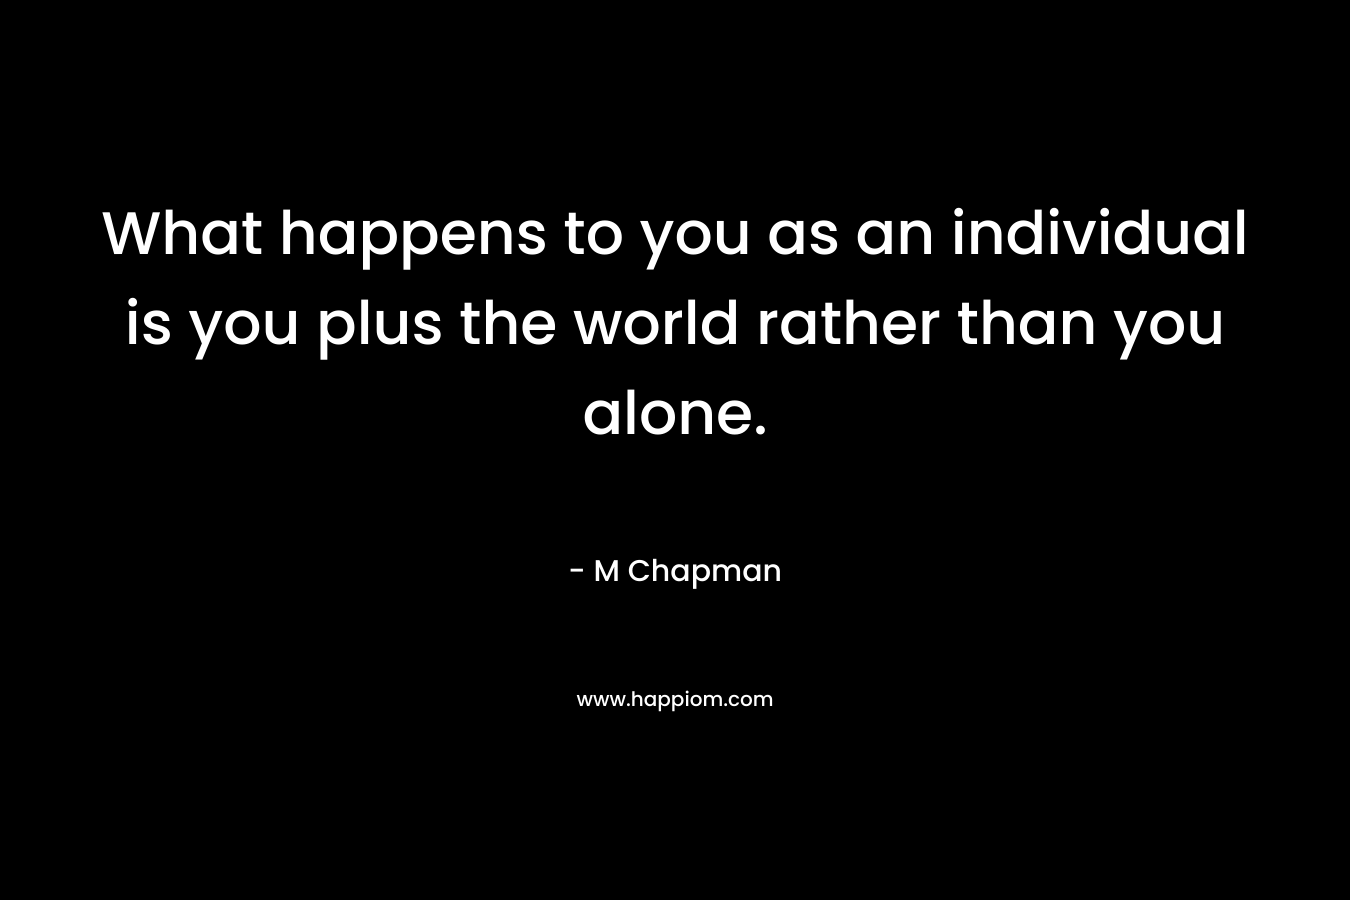 What happens to you as an individual is you plus the world rather than you alone. – M Chapman